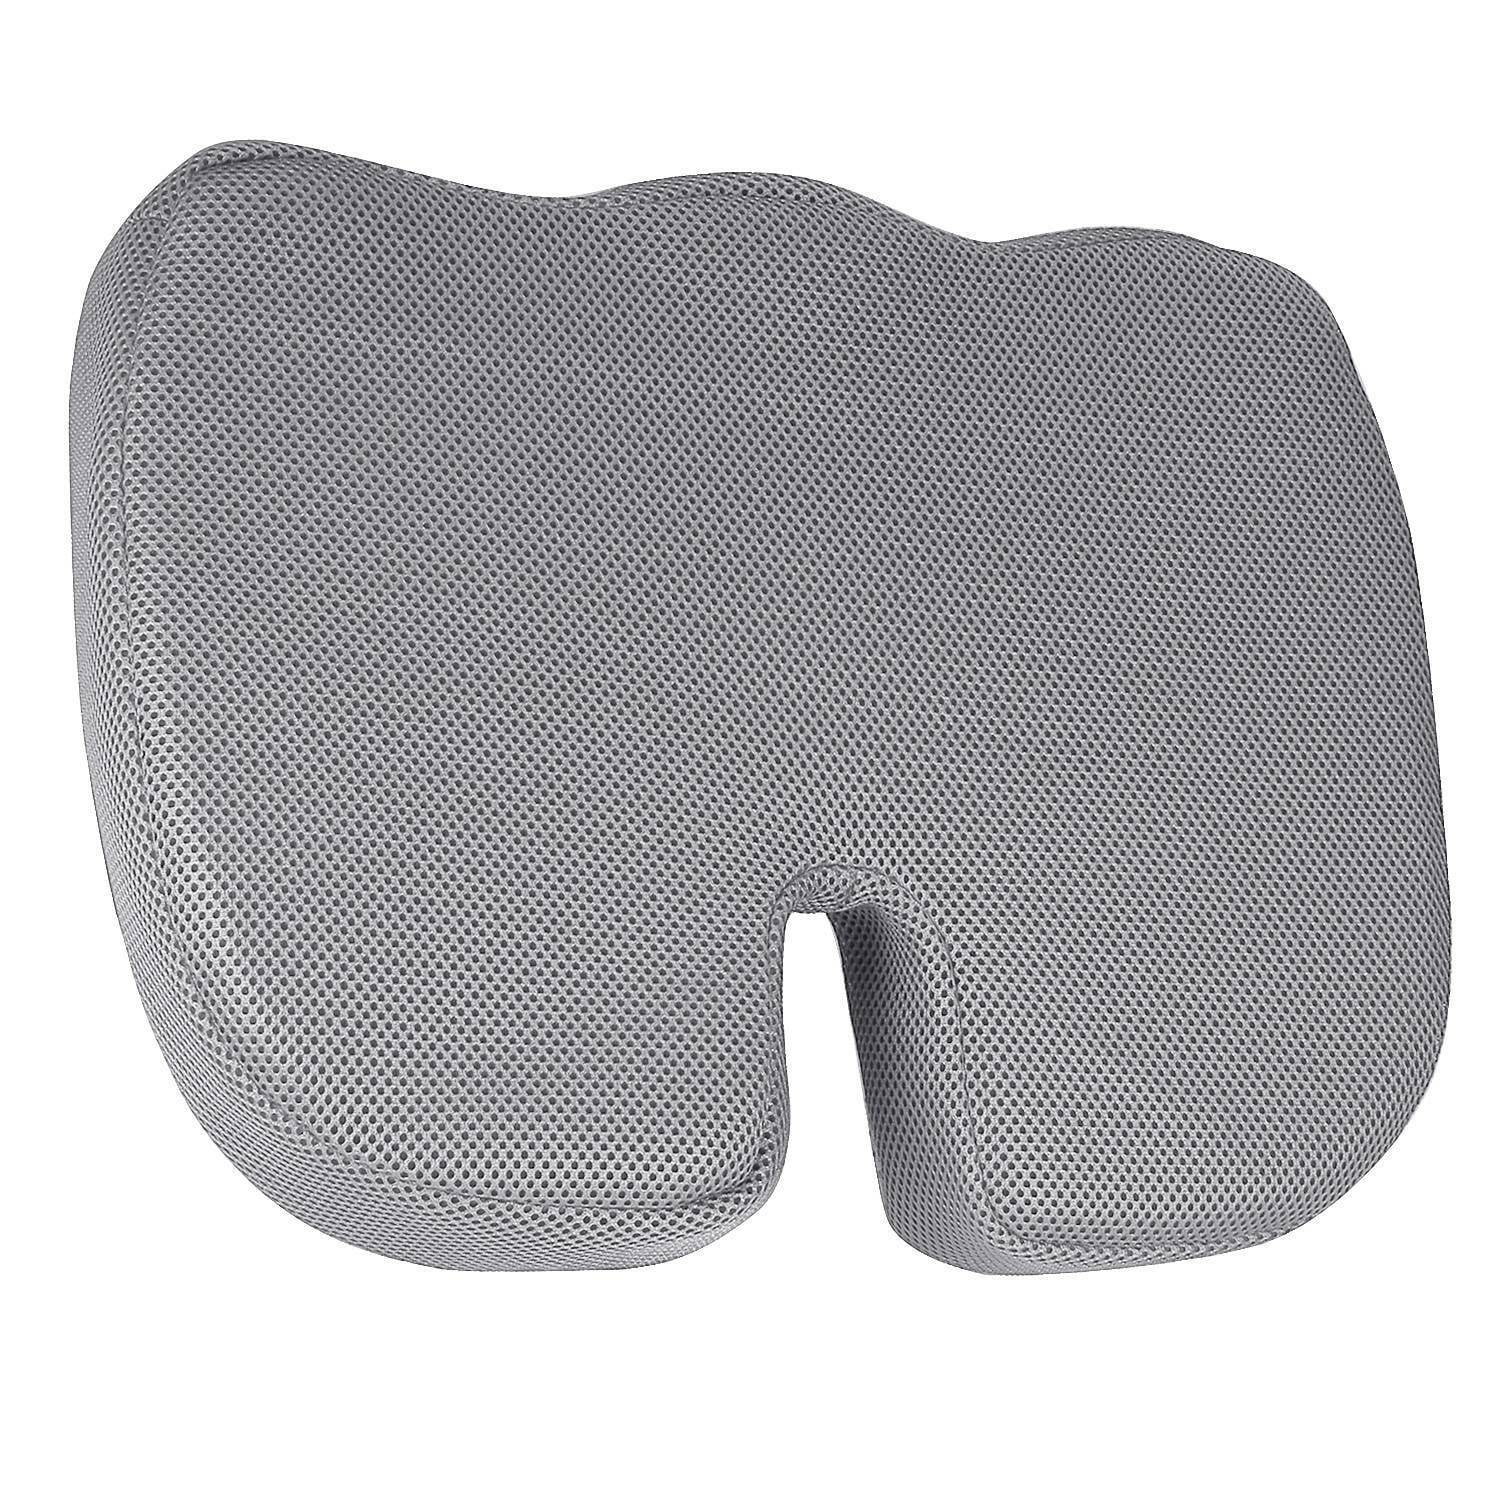 LAMPPE Butt Pillows for Sitting, Coccygeal Cushions Premium Memory Foam  Washable, Tailbone Cushion for Back,Coccyx,Tailbone Pain Relief,Gray